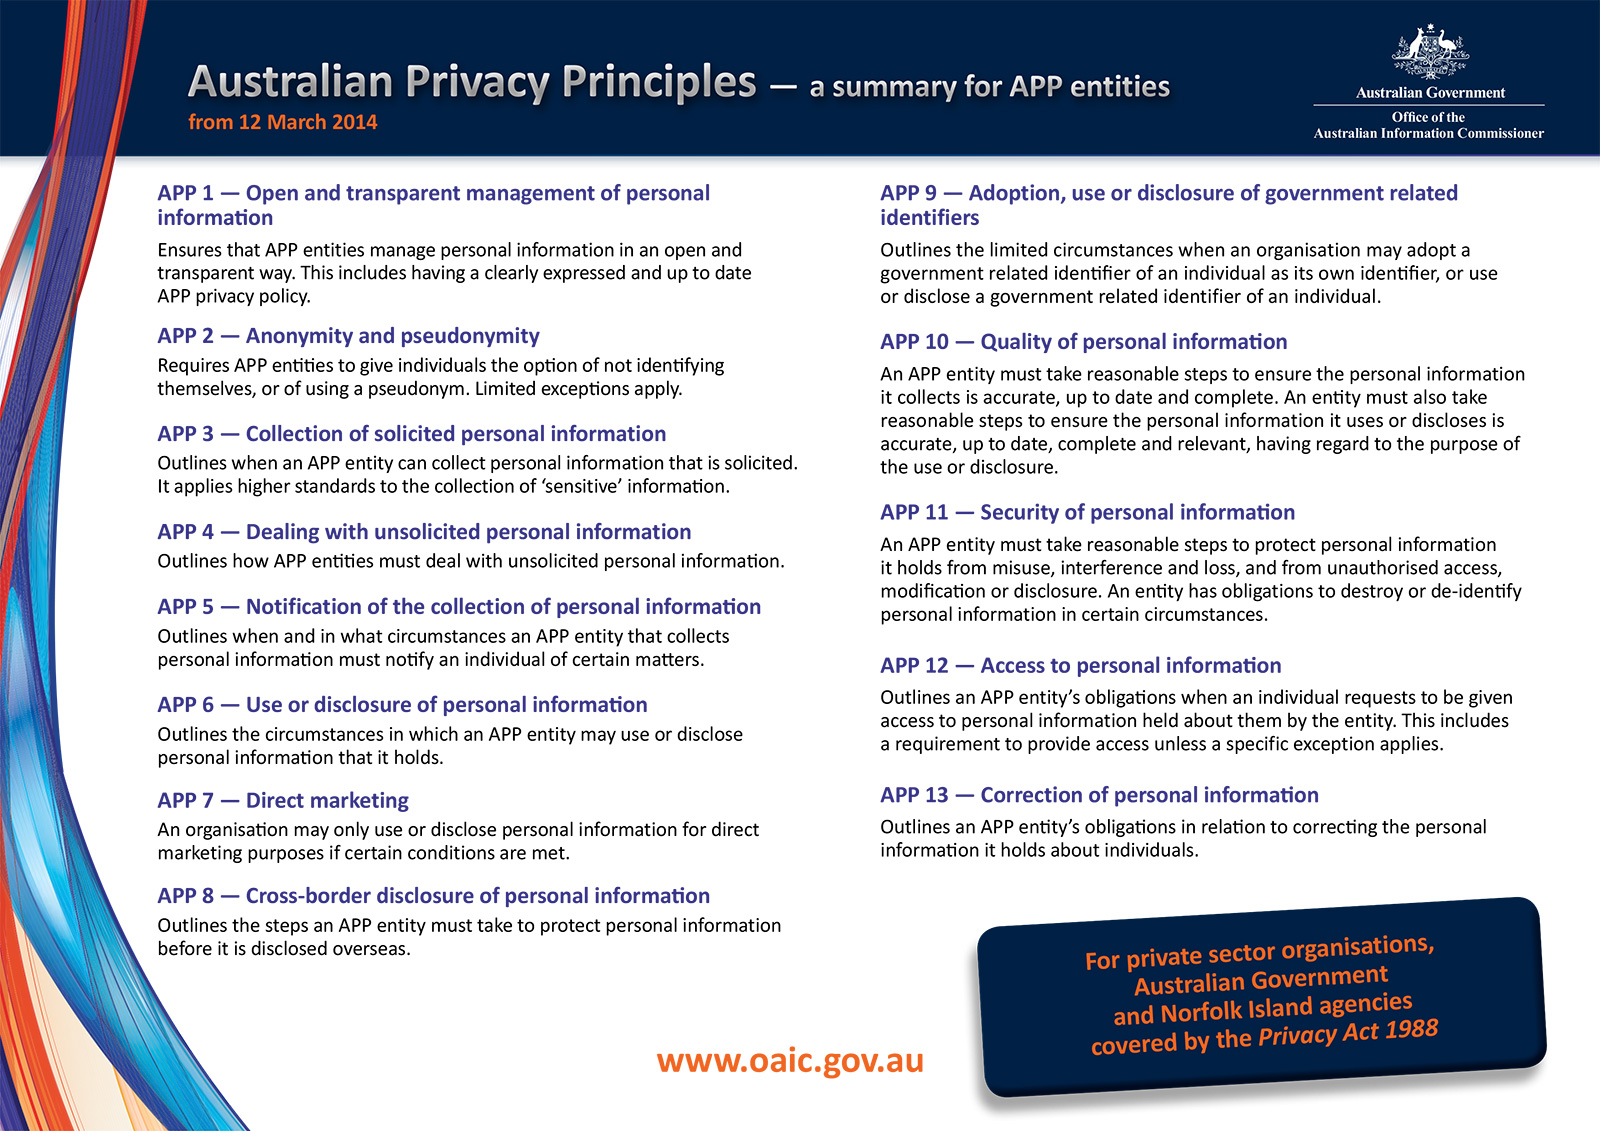 Australian Privacy Principles - a summary for AFP entities